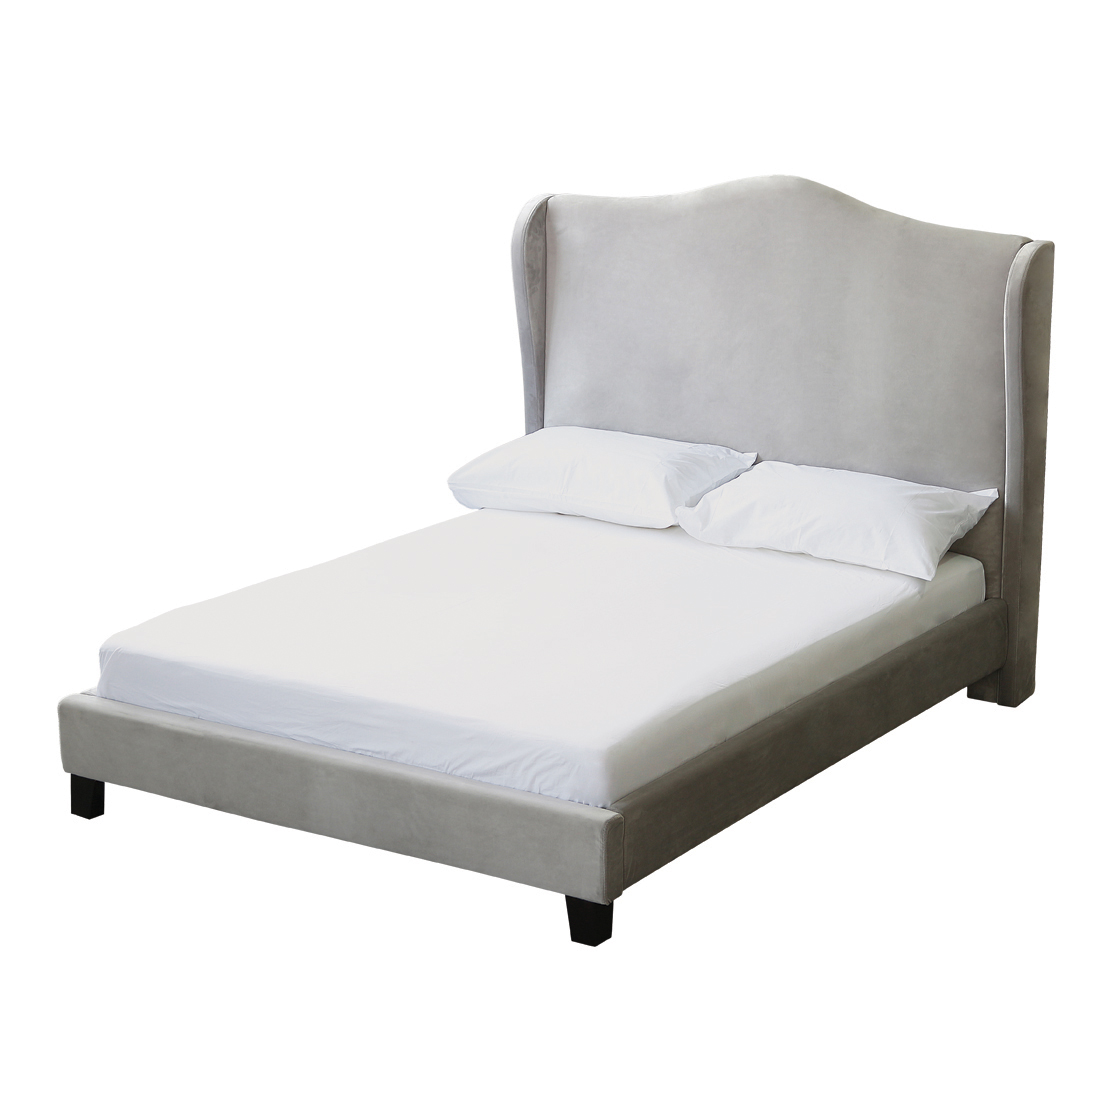 Chisor 4.6 Double Bed Silver